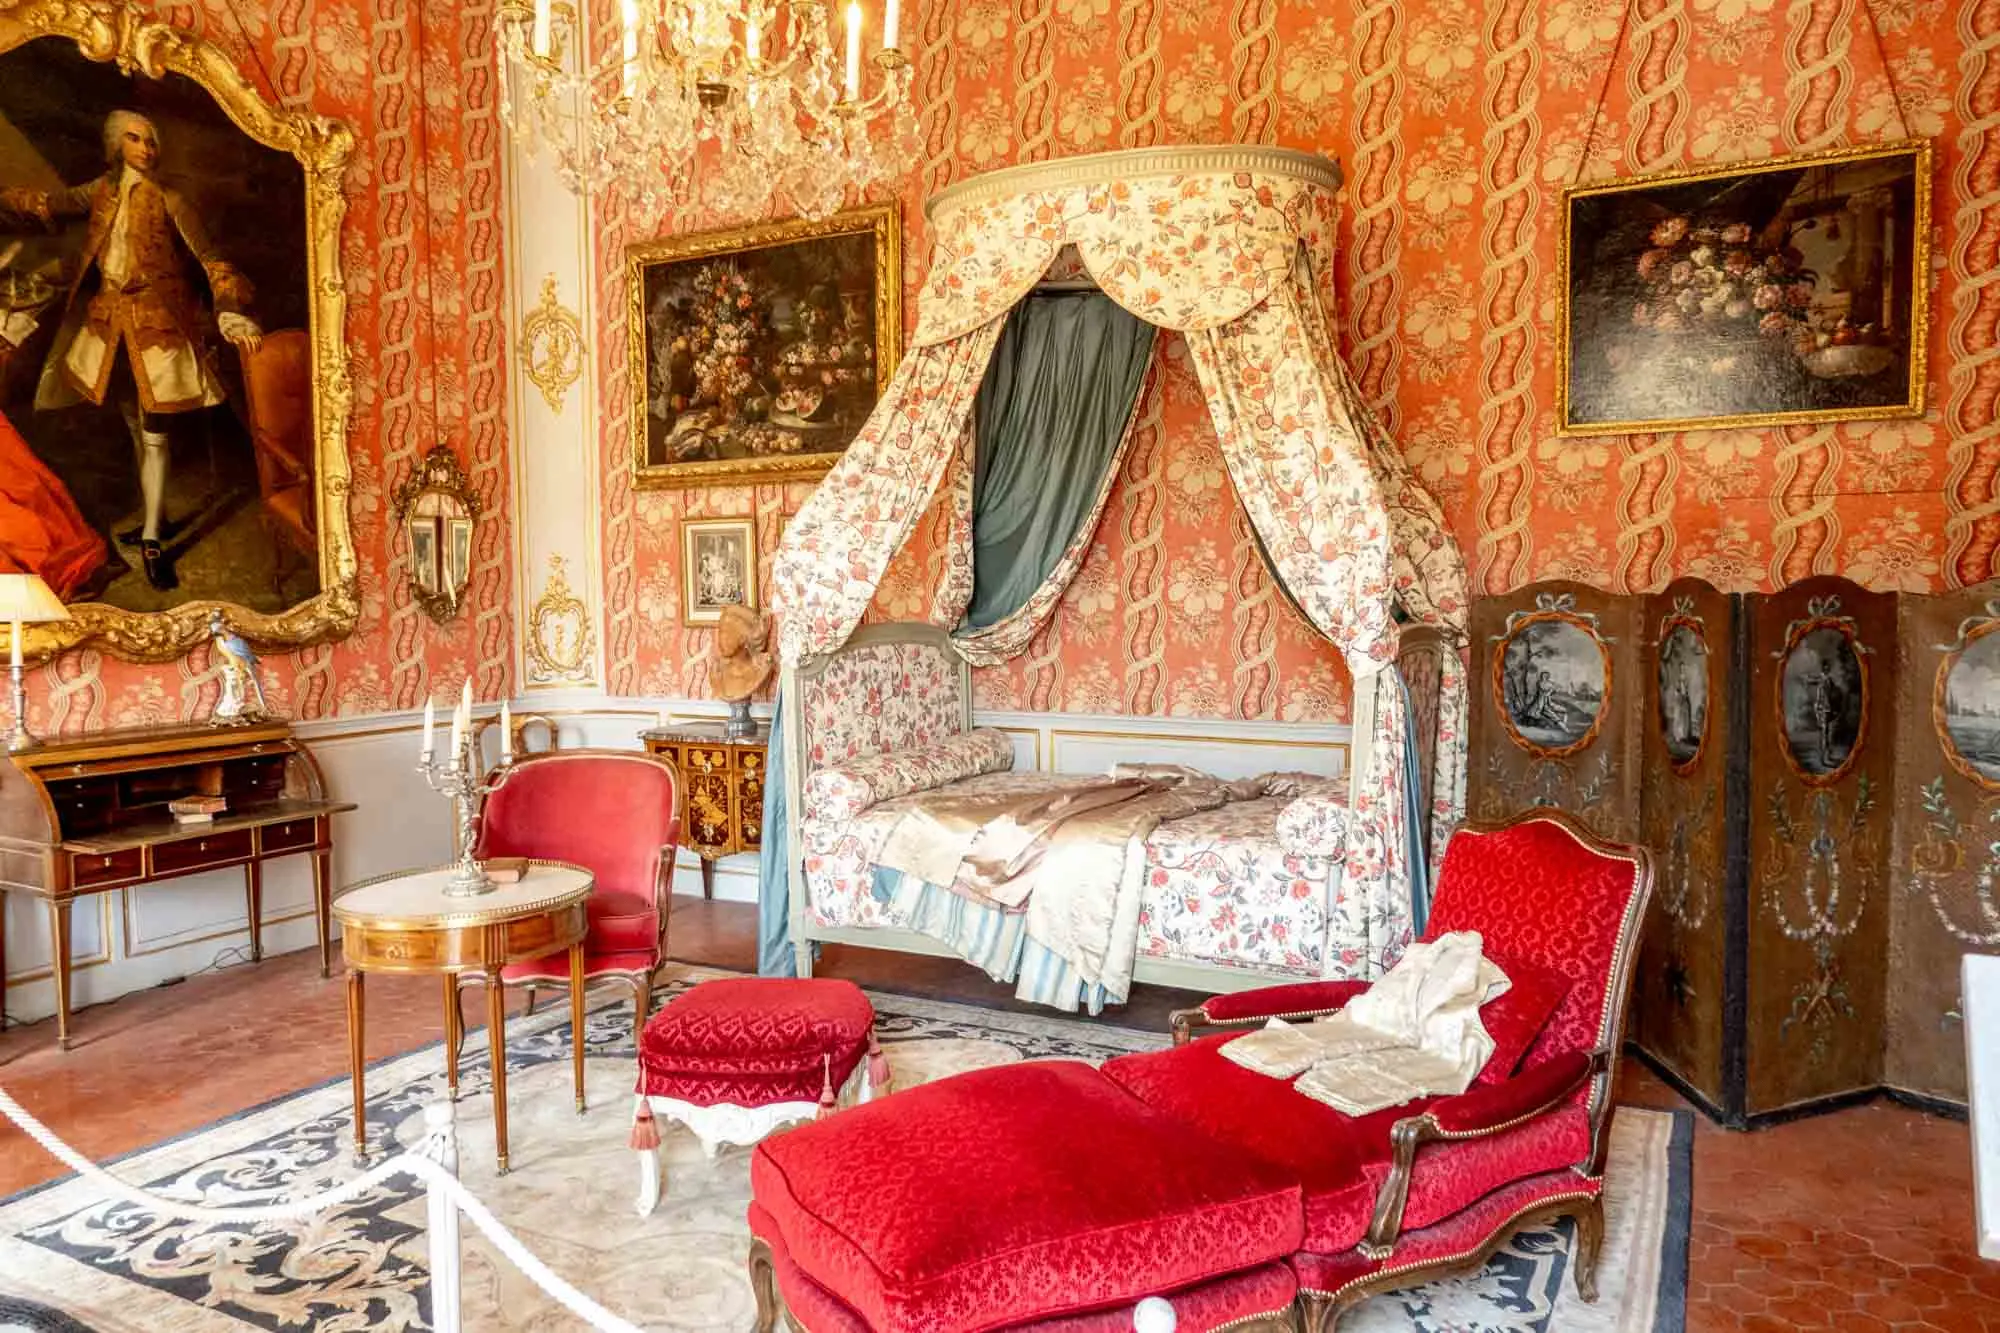 Bedroom full of paintings and opulent furnishings